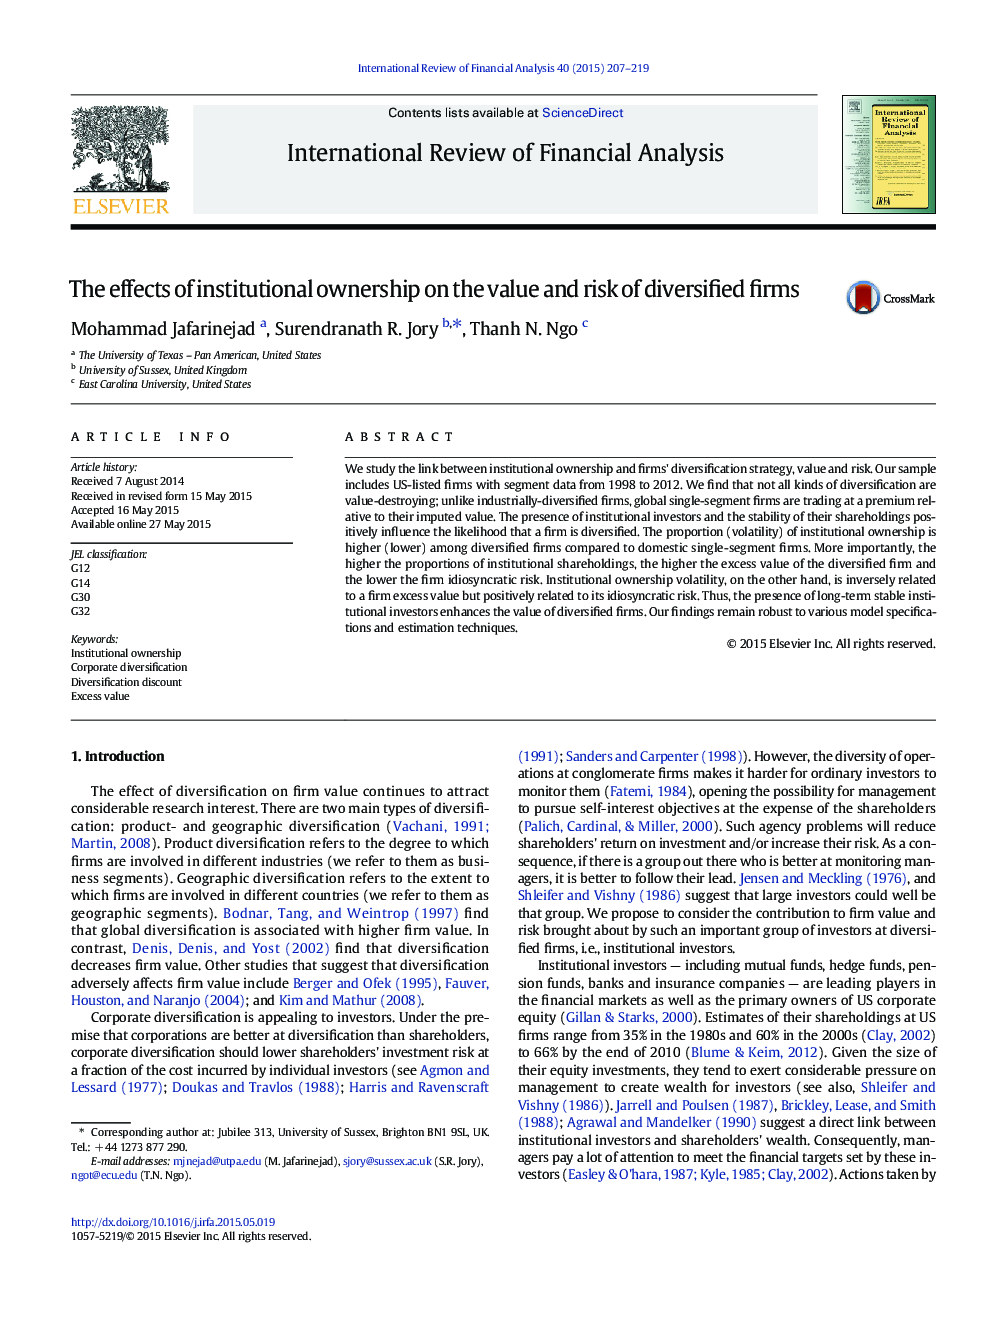 The effects of institutional ownership on the value and risk of diversified firms